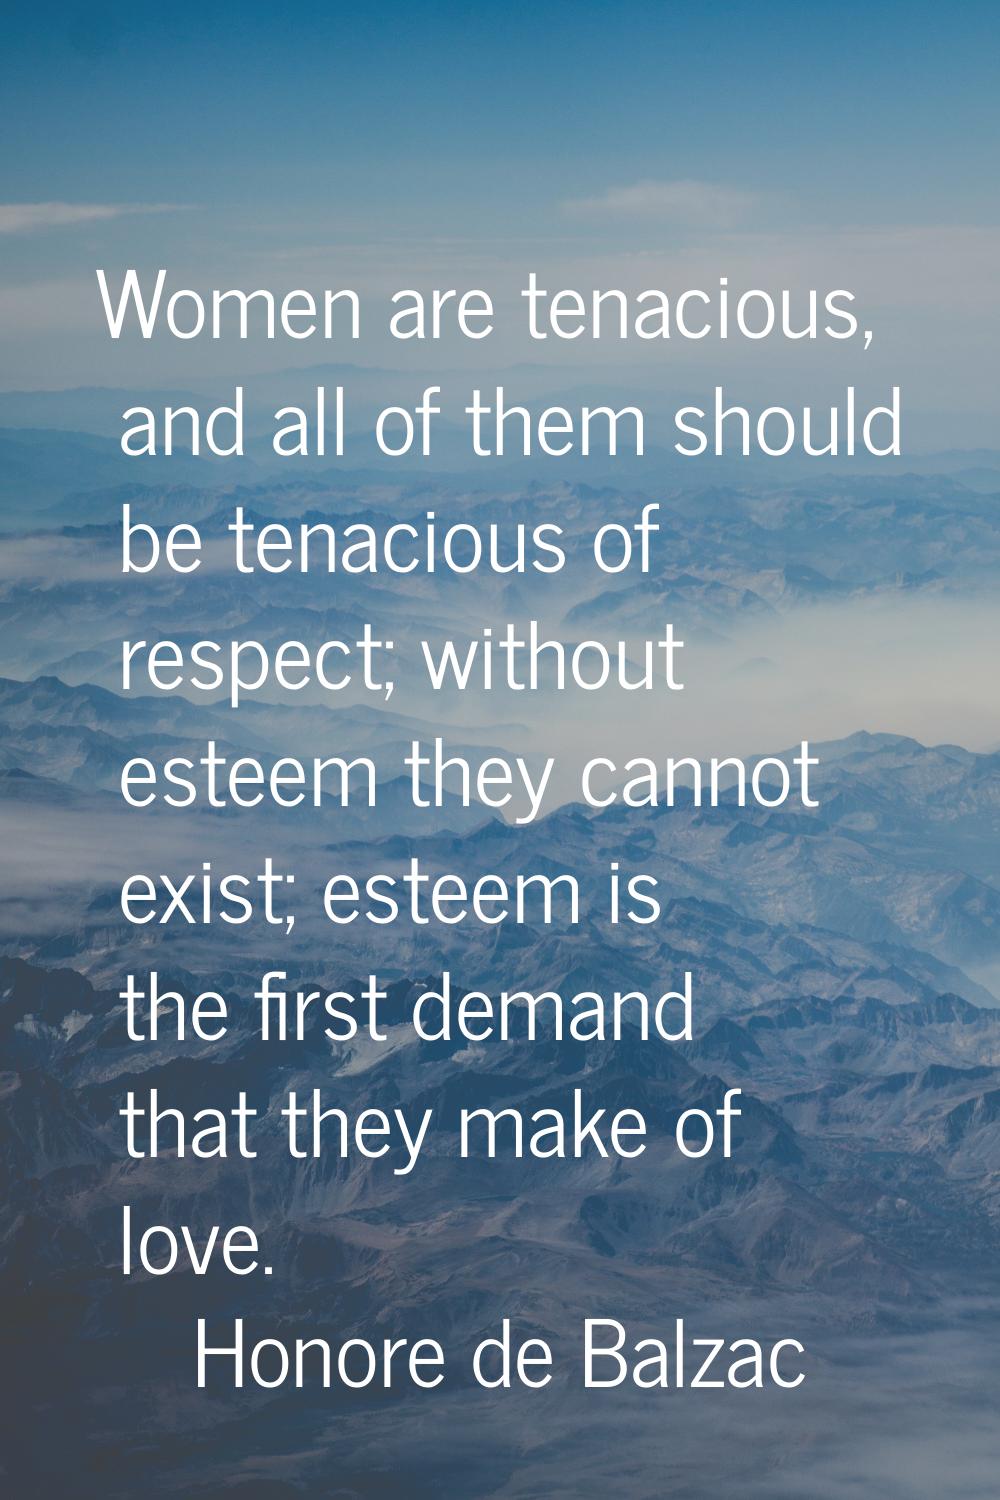 Women are tenacious, and all of them should be tenacious of respect; without esteem they cannot exi